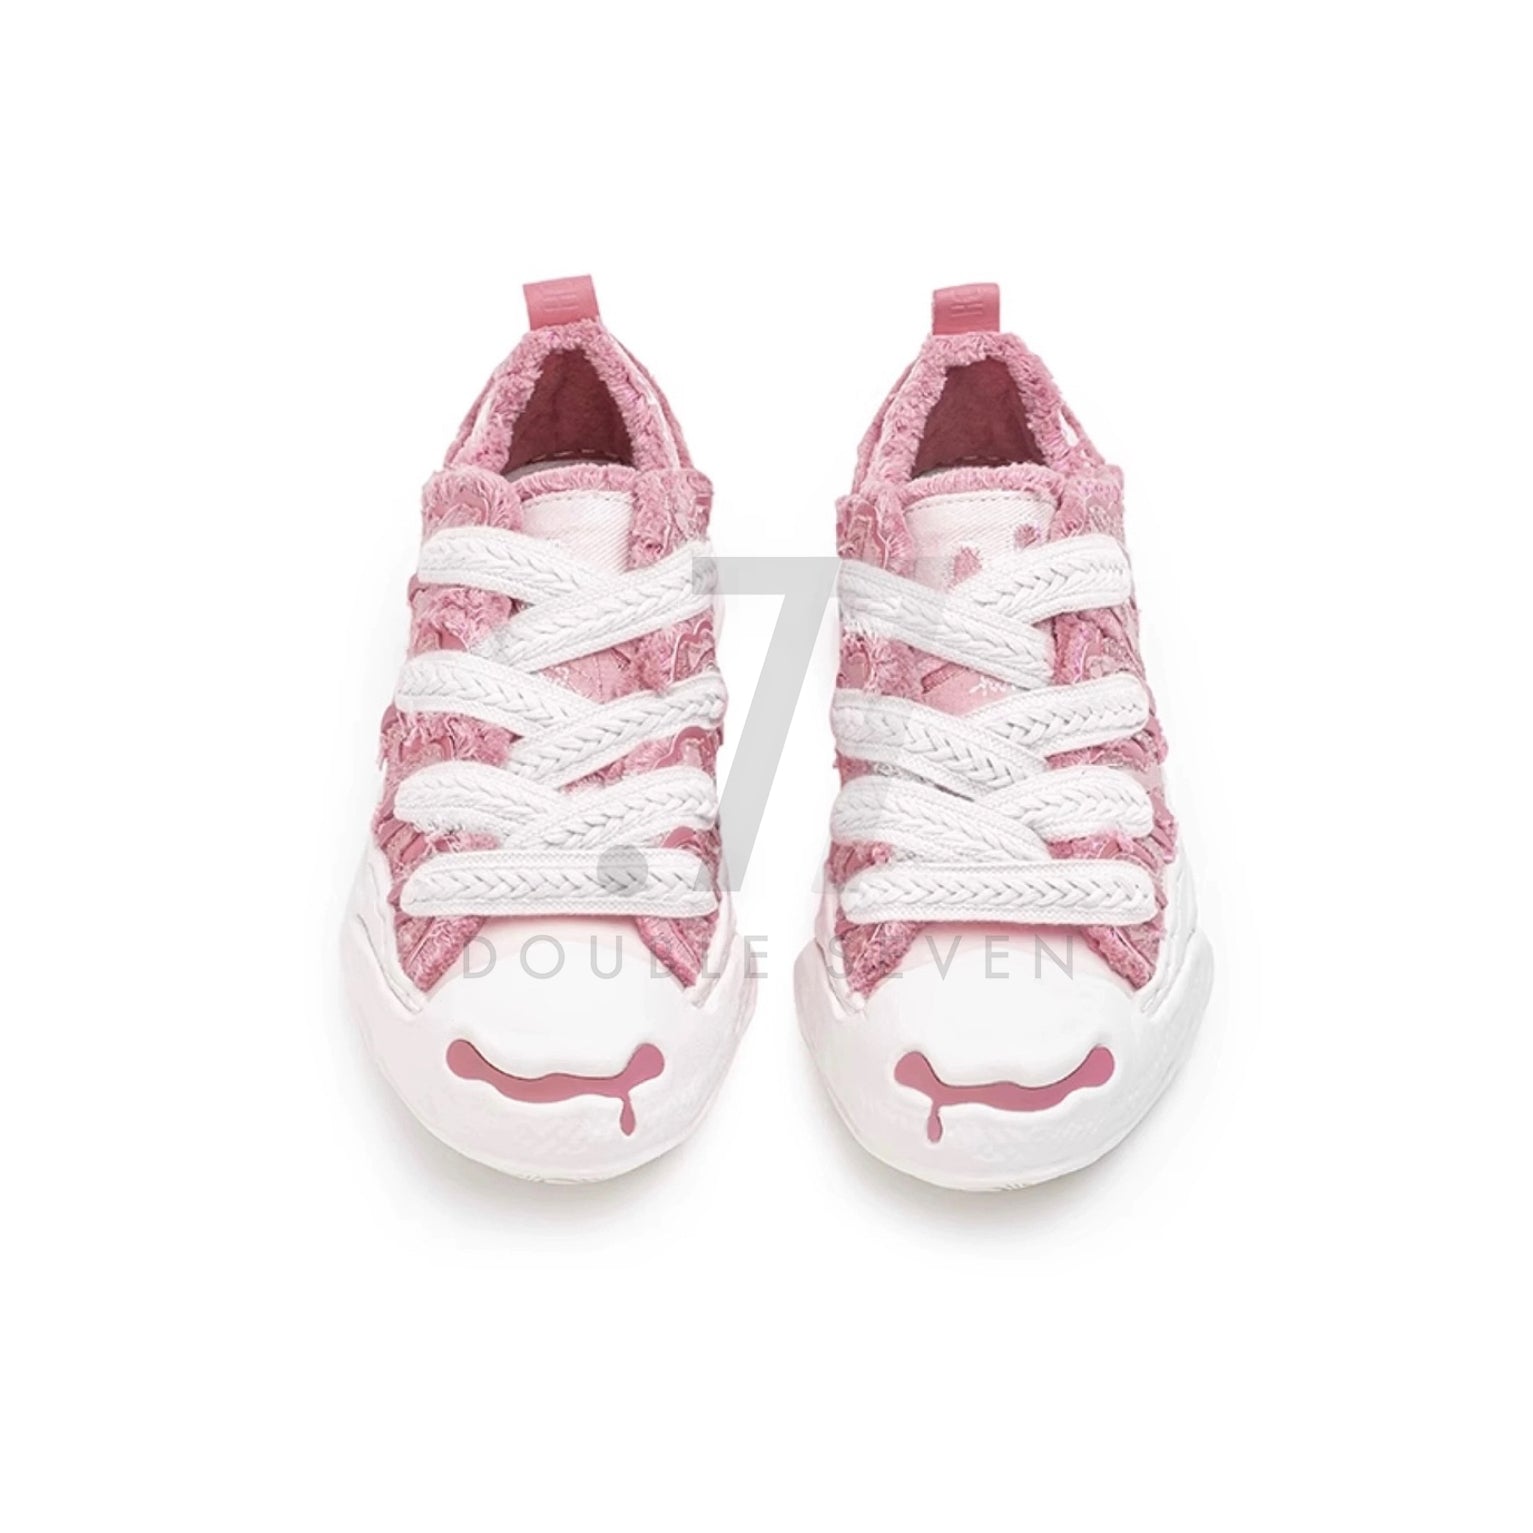 H52 Canvas Low Top Dusty Pink Shoes (Preorder)